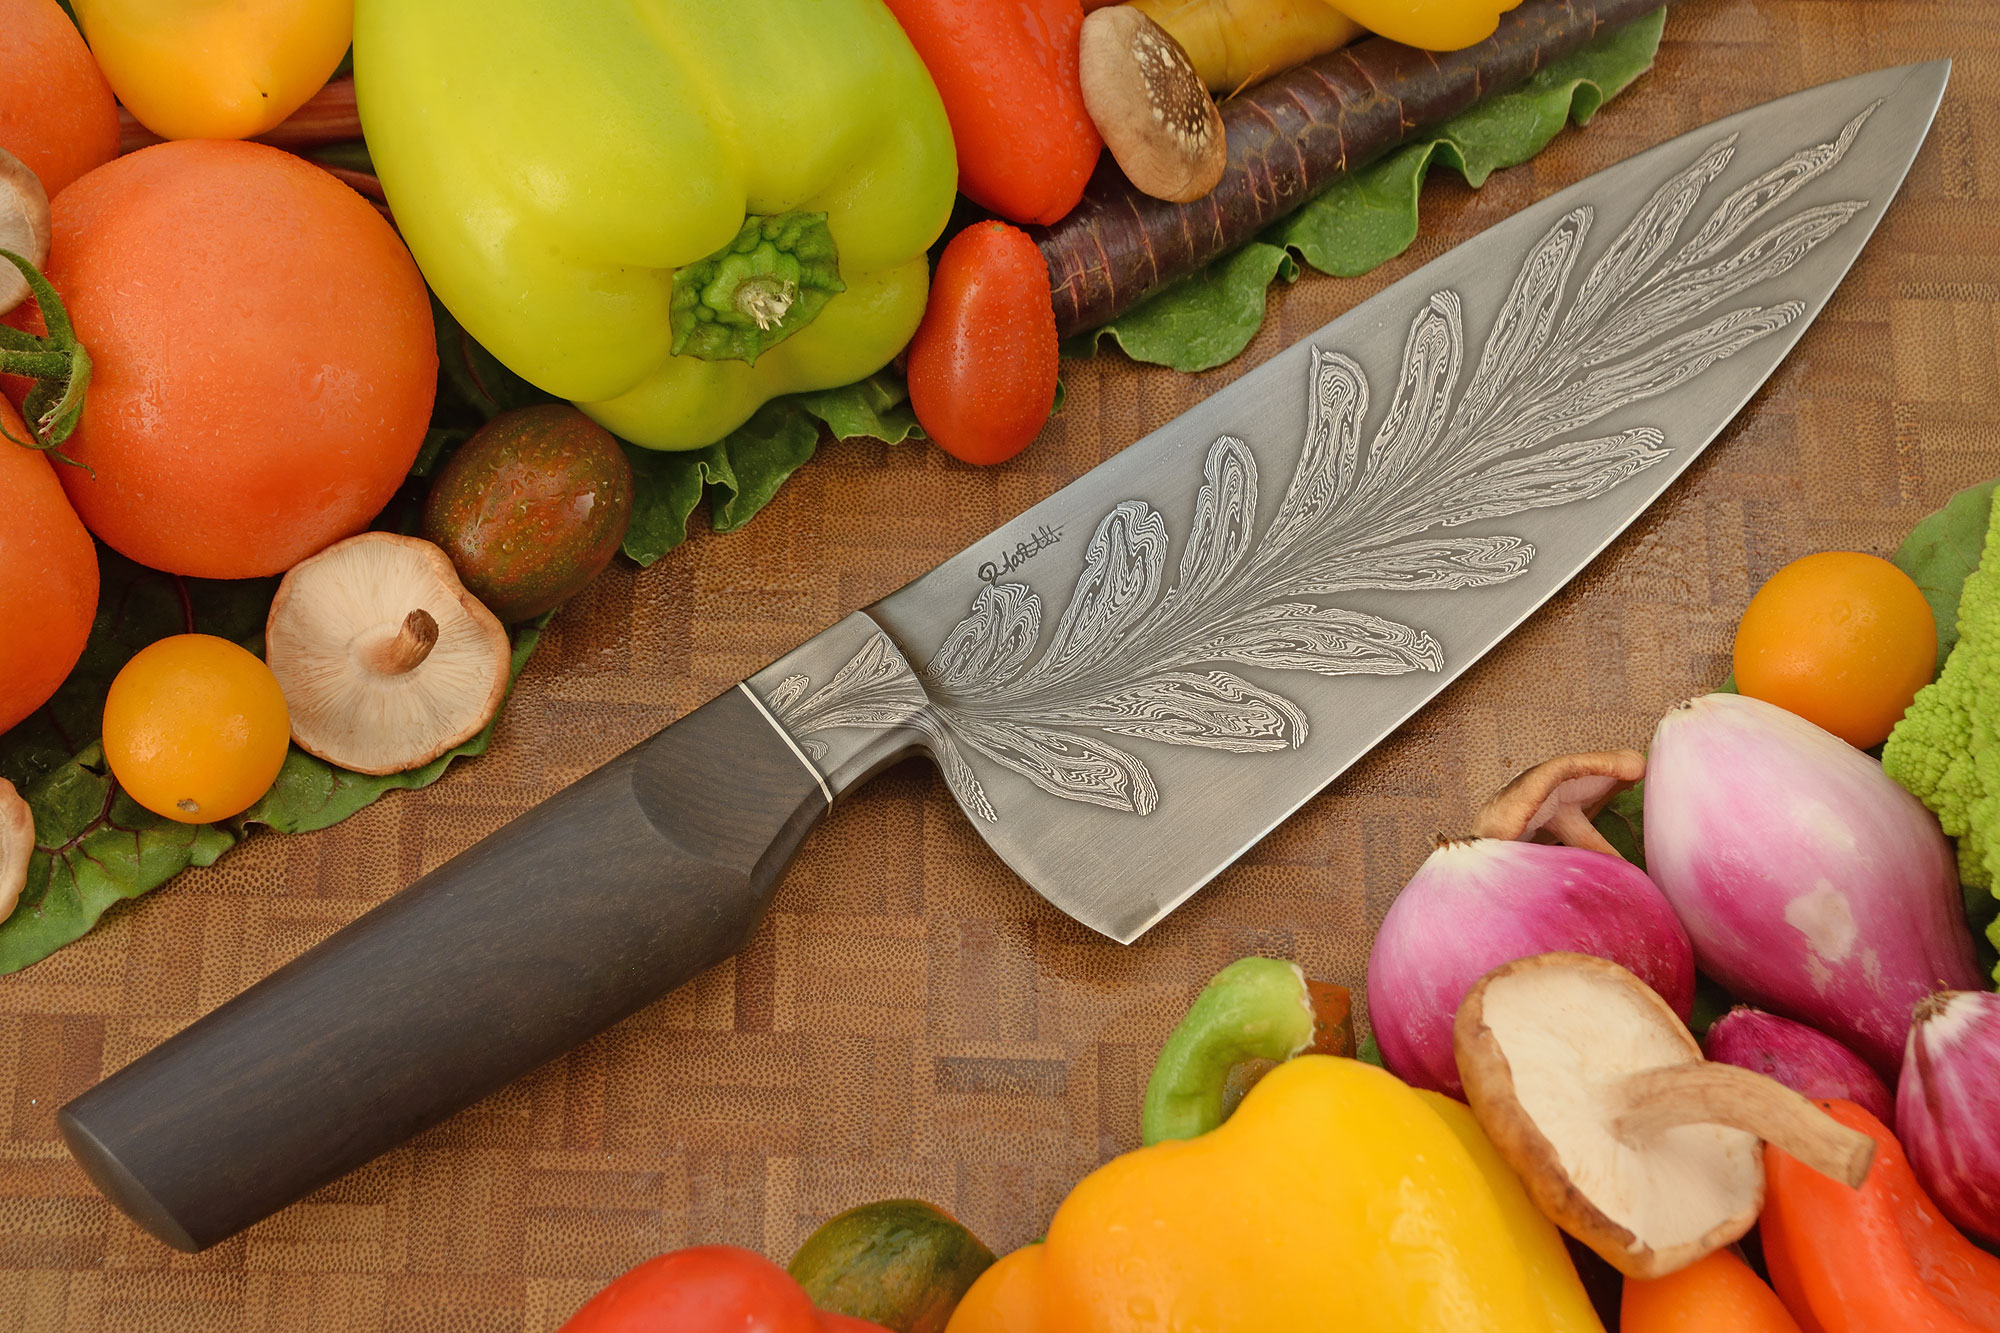 Multi-function: Professional Knife Set Damascus Stainless Steel Kitchen  Knife Buy Top Cutlery Knife Sets Cooking Knives - Best Damascus Chef's  Knives